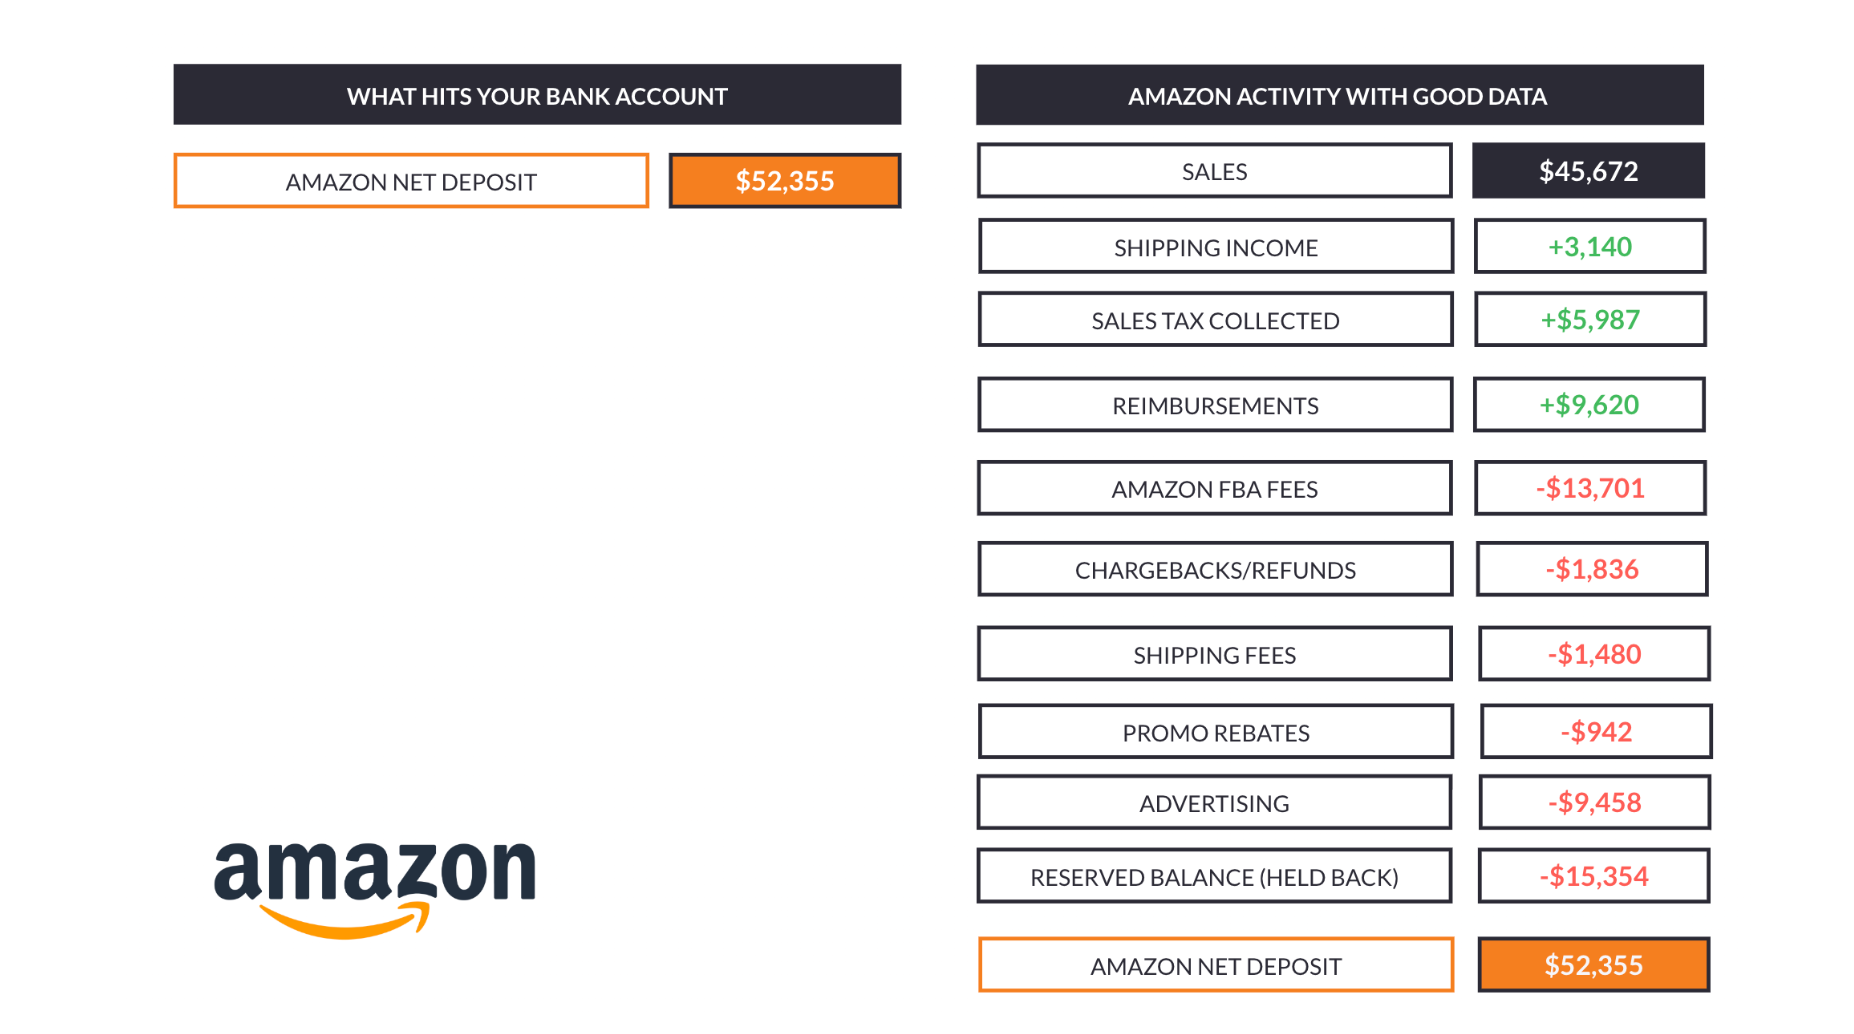 On the right side is an Amazon net deposit, on the left is that same net deposit broken down by its various transaction types